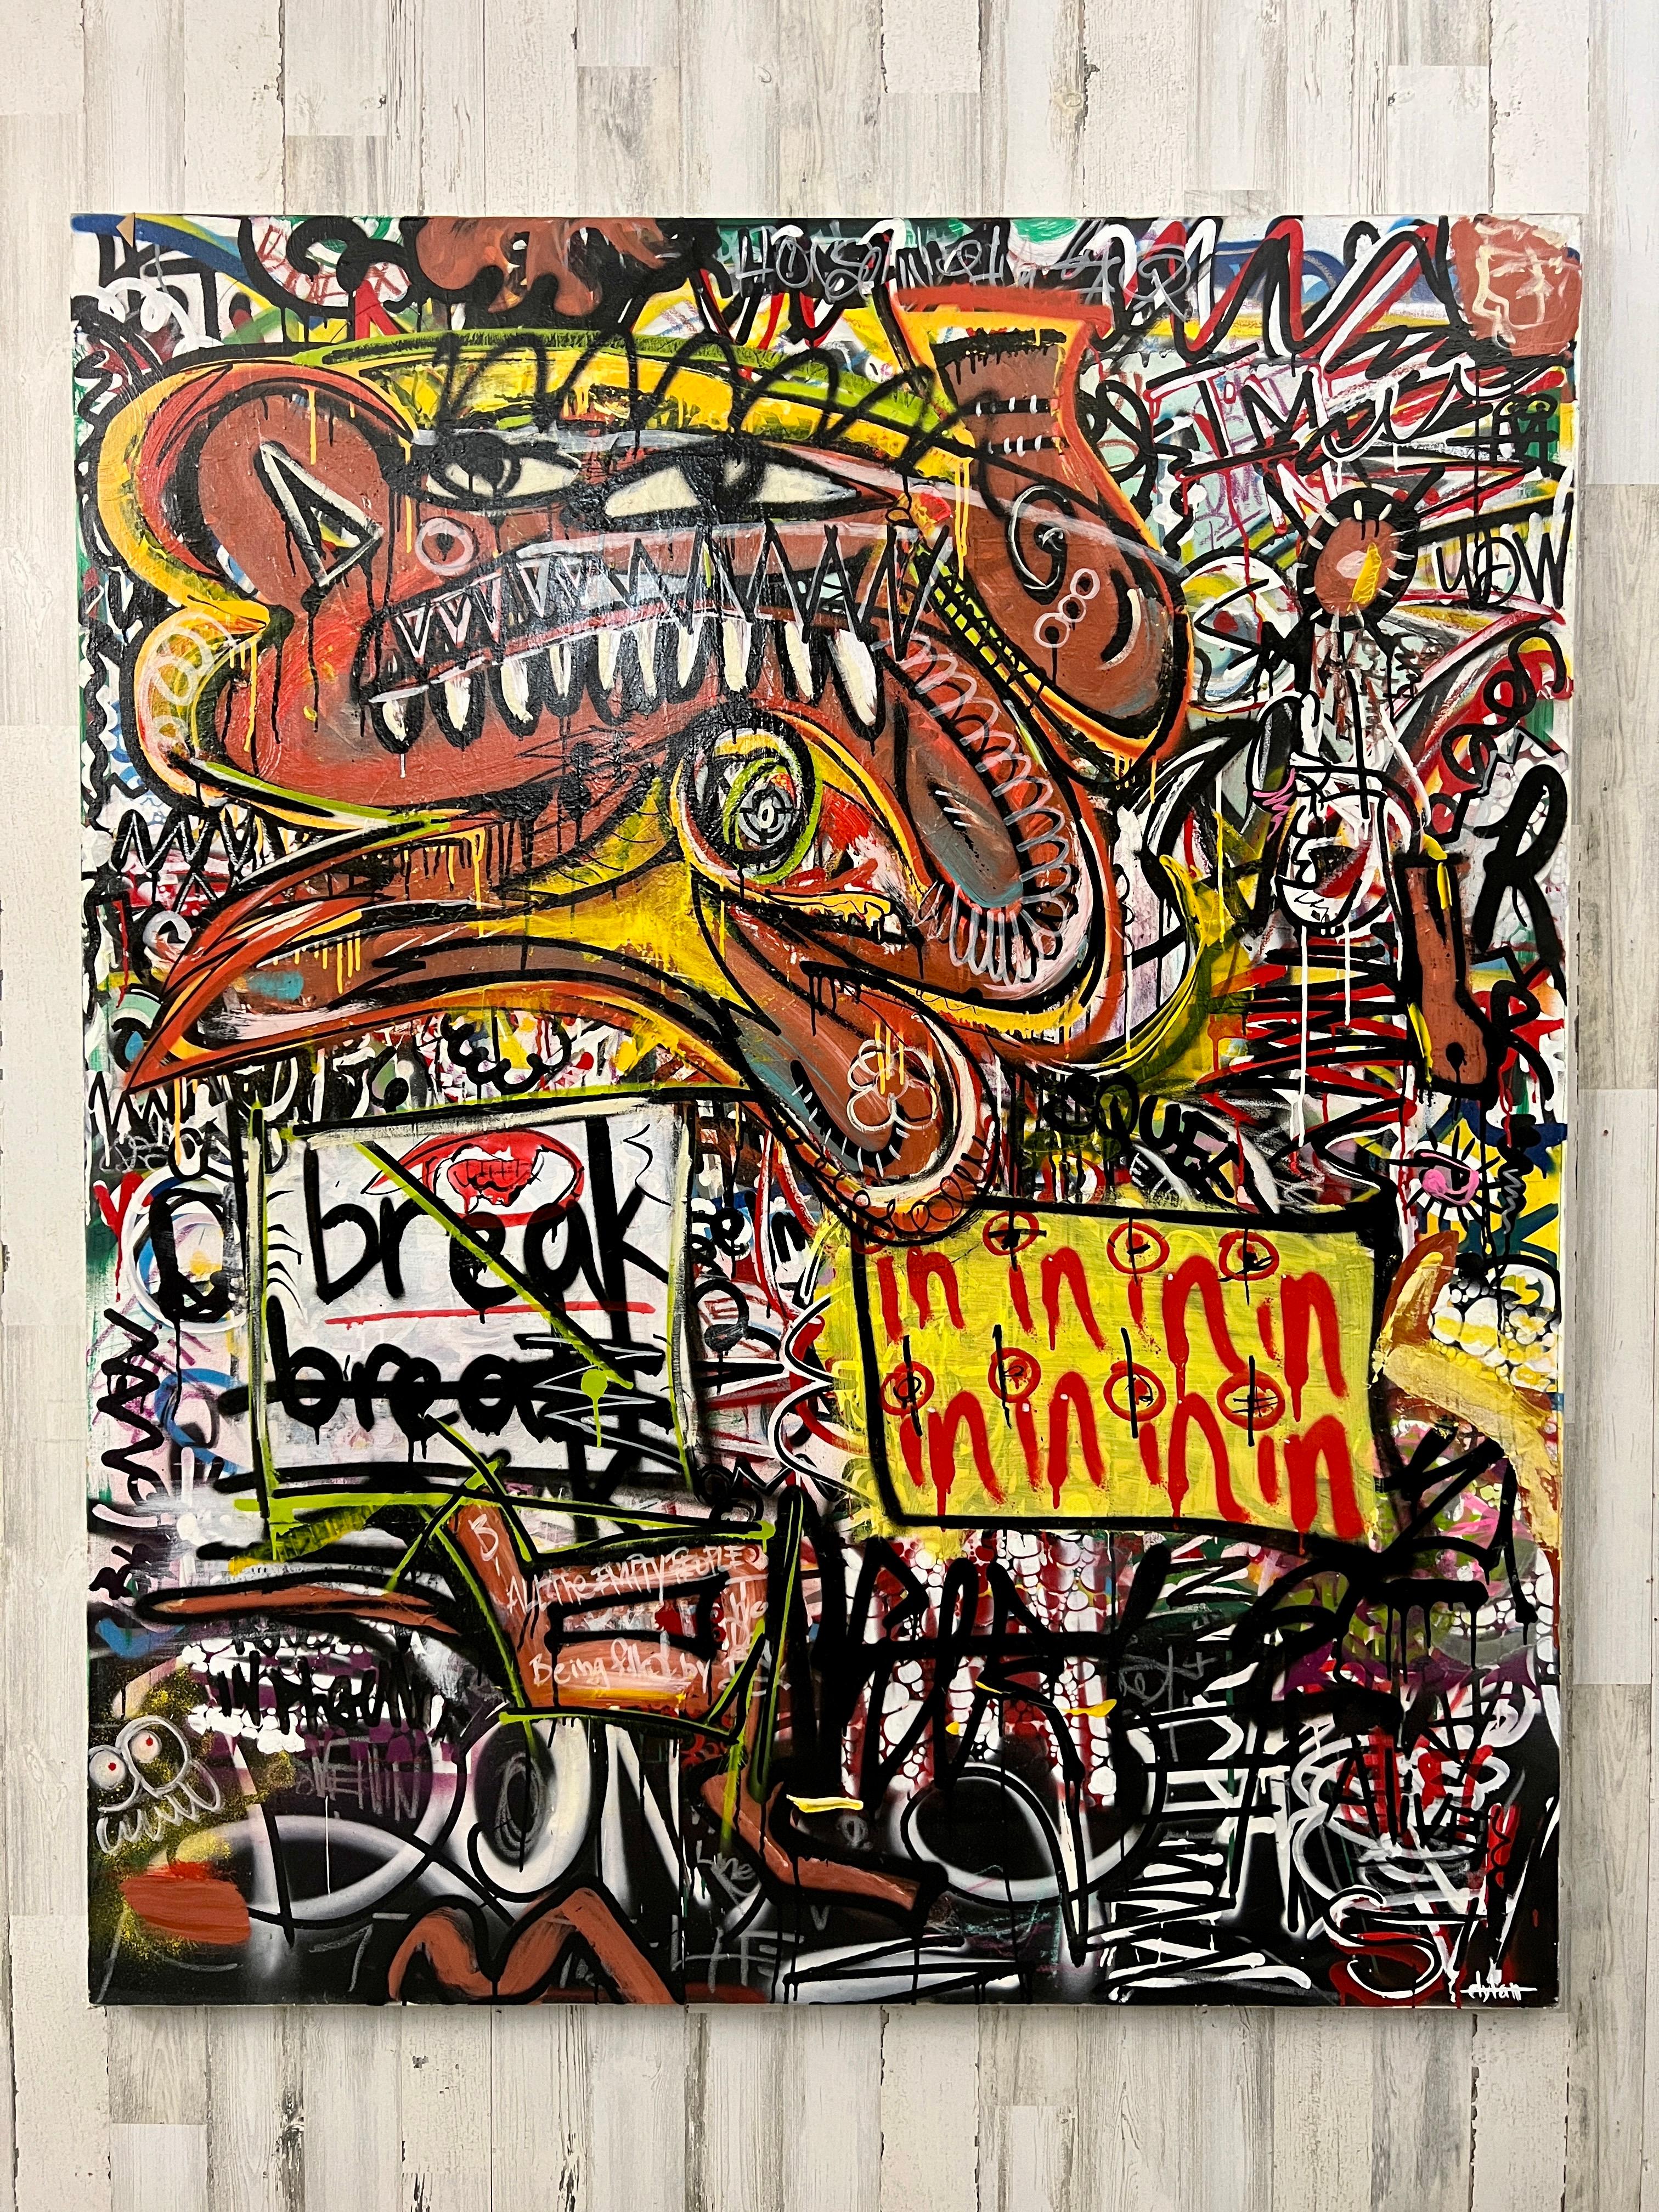 A mixed media of acrylic paint applied by hand with acrylic spray paint and alcohol ink on a wood framed canvas. Inspired by the great Graffiti artist of modern history Dylans bold 